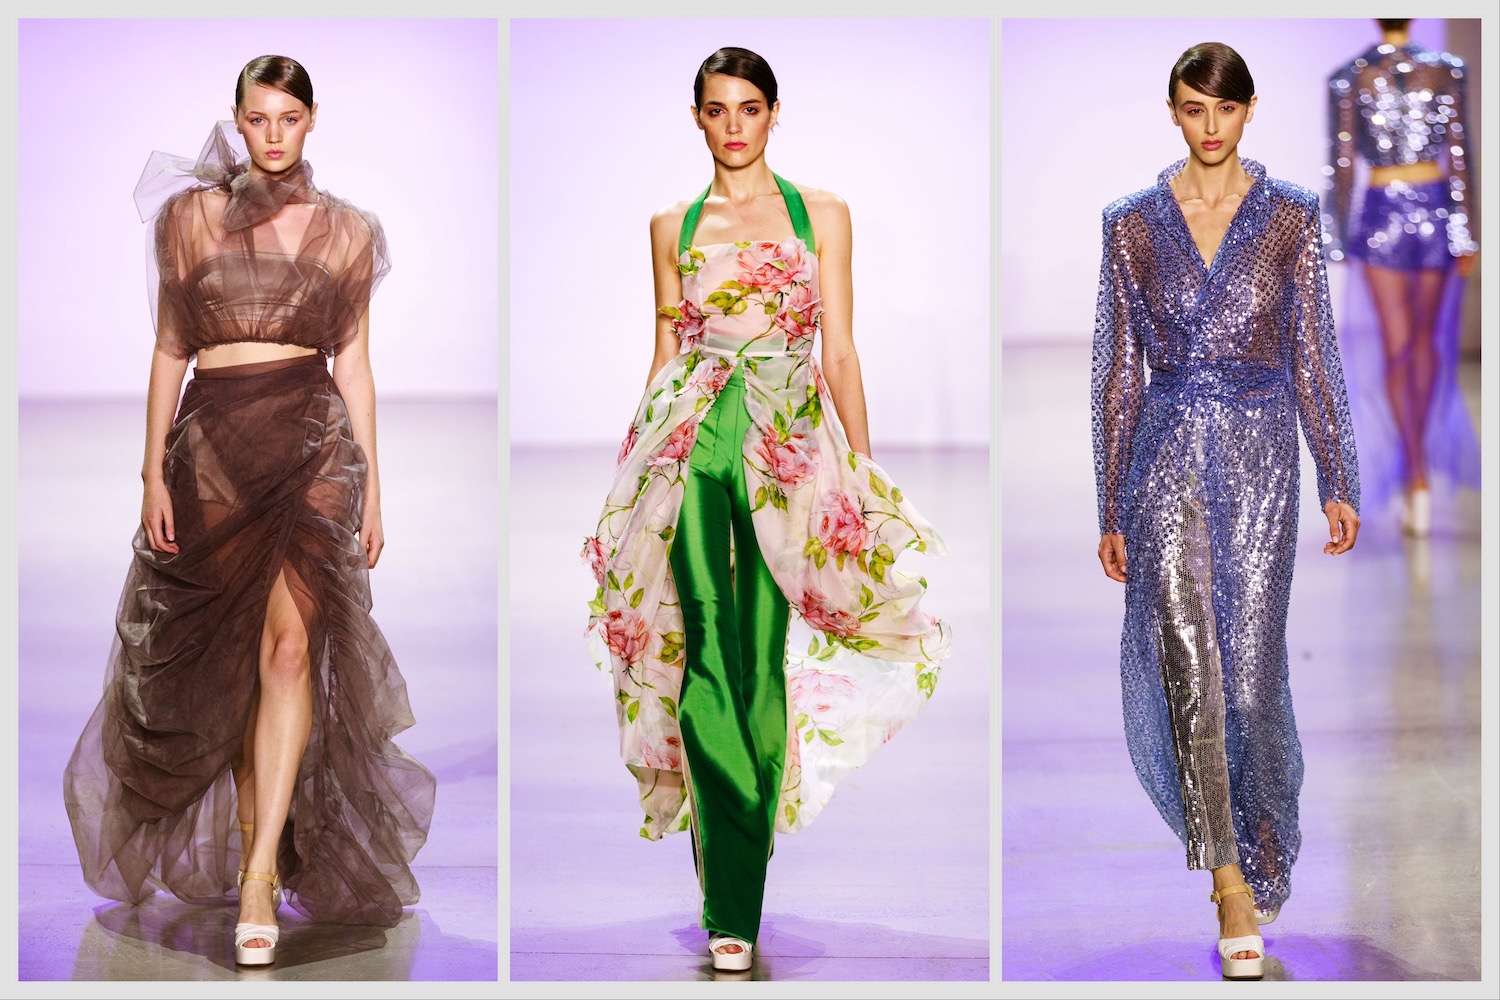 A collection of three images. From left to right: a model wearing a sienna silk tulle dress; a model wearing a camellia-pattern top and a pair of green silk pants; a model wearing a purple sheer robe and a pair of silver tulle pants.